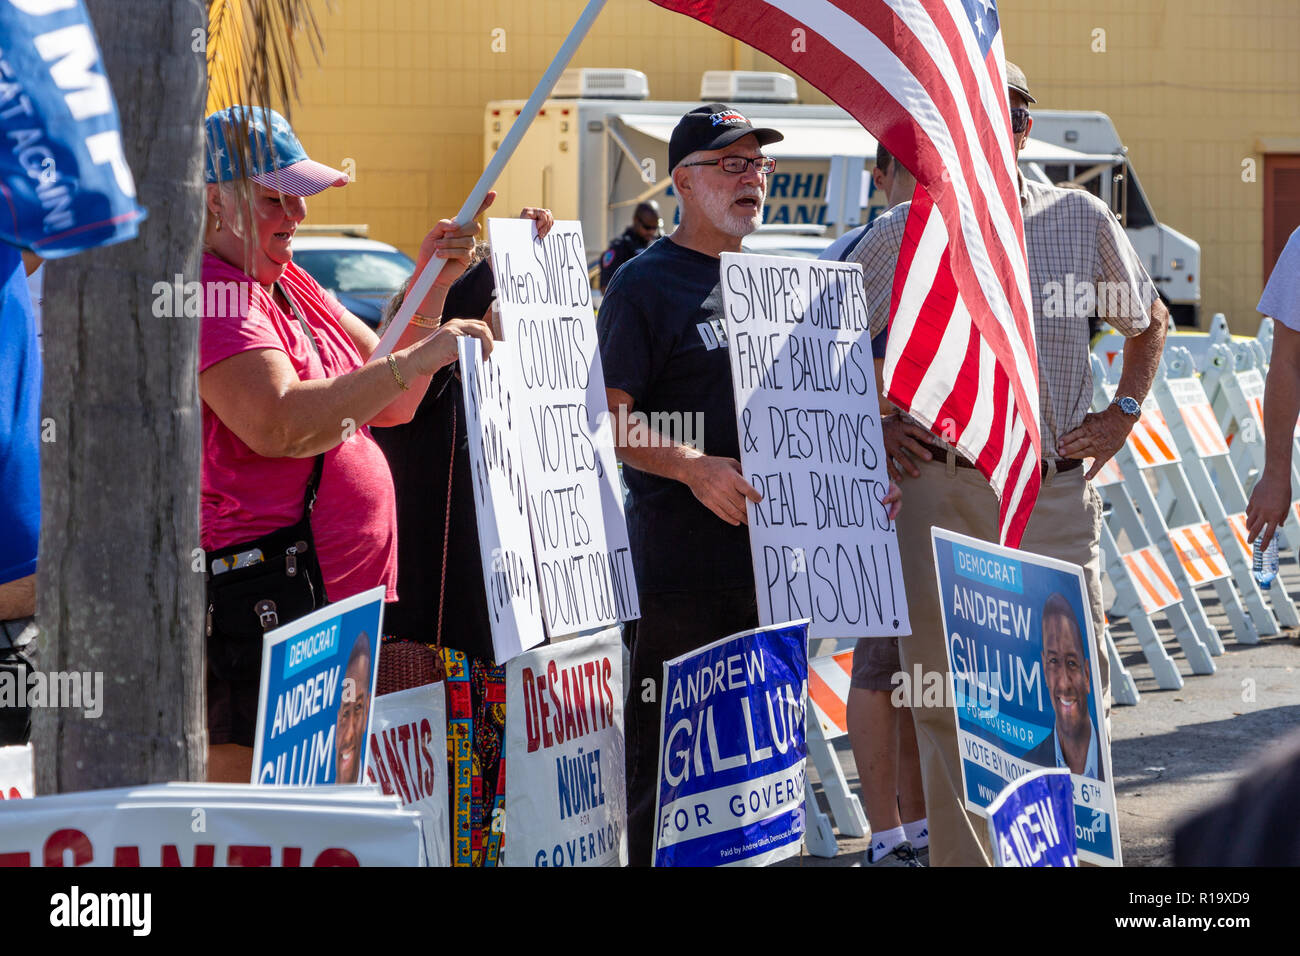 Lauderhill, Florida, USA. 10th Nov, 2018. Republicans at vote counting protest outside Broward County Supervisor of Elections Brenda Snipes' office. The protest began over controversy surrounding the results of the 2018 midterm elections for Florida Governor and Florida Senator. Holly Guerrio/Alamy Live News Stock Photo